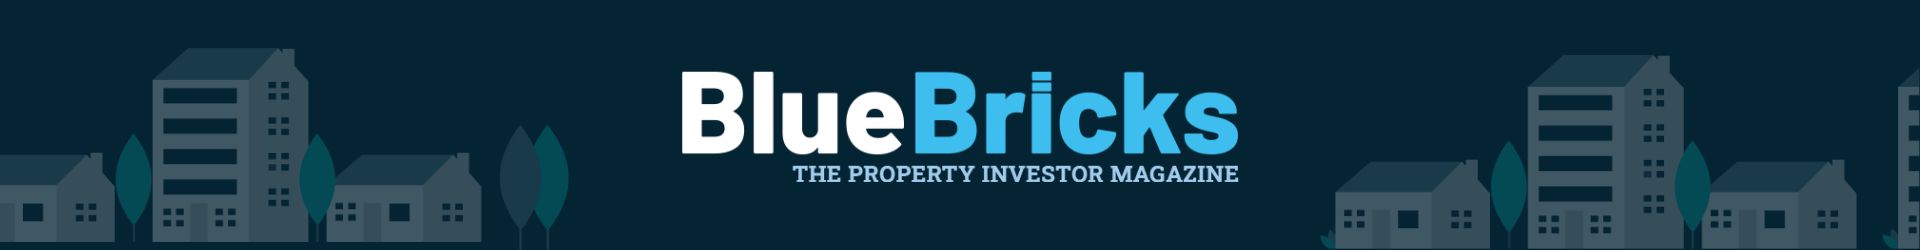 Sharing Invaluable Information to Property Sourcing Agents and Investors with Blue Bricks